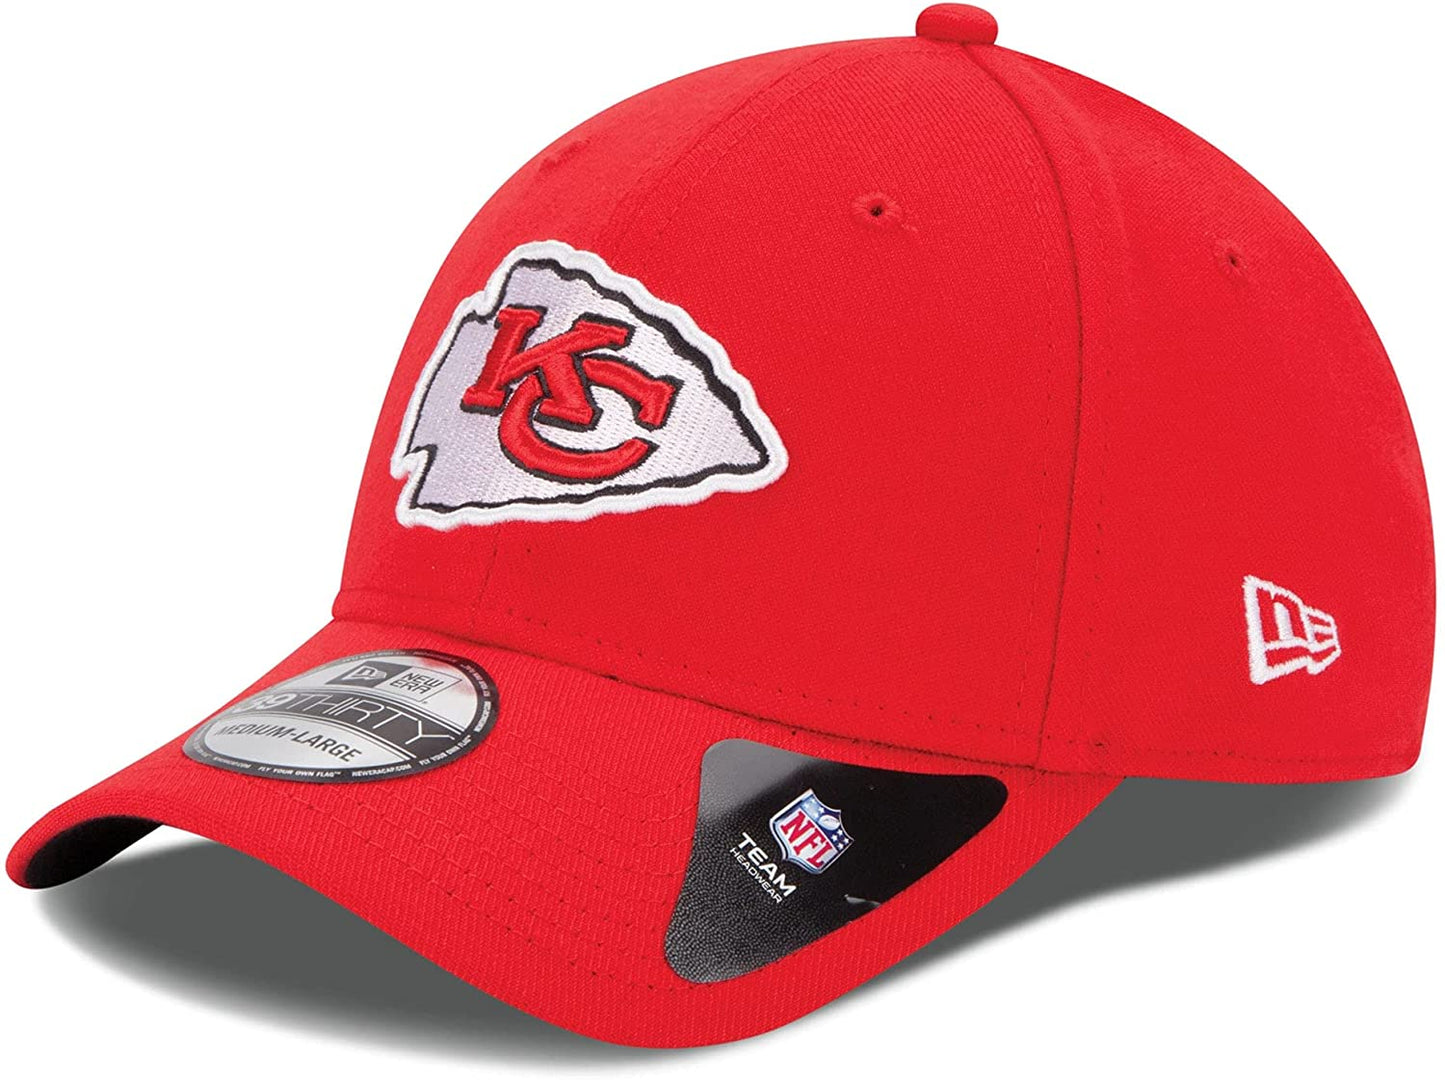 New Era 39Thirty NFL Kansas City Chiefs Team Classic Red Flex Fitted Hat